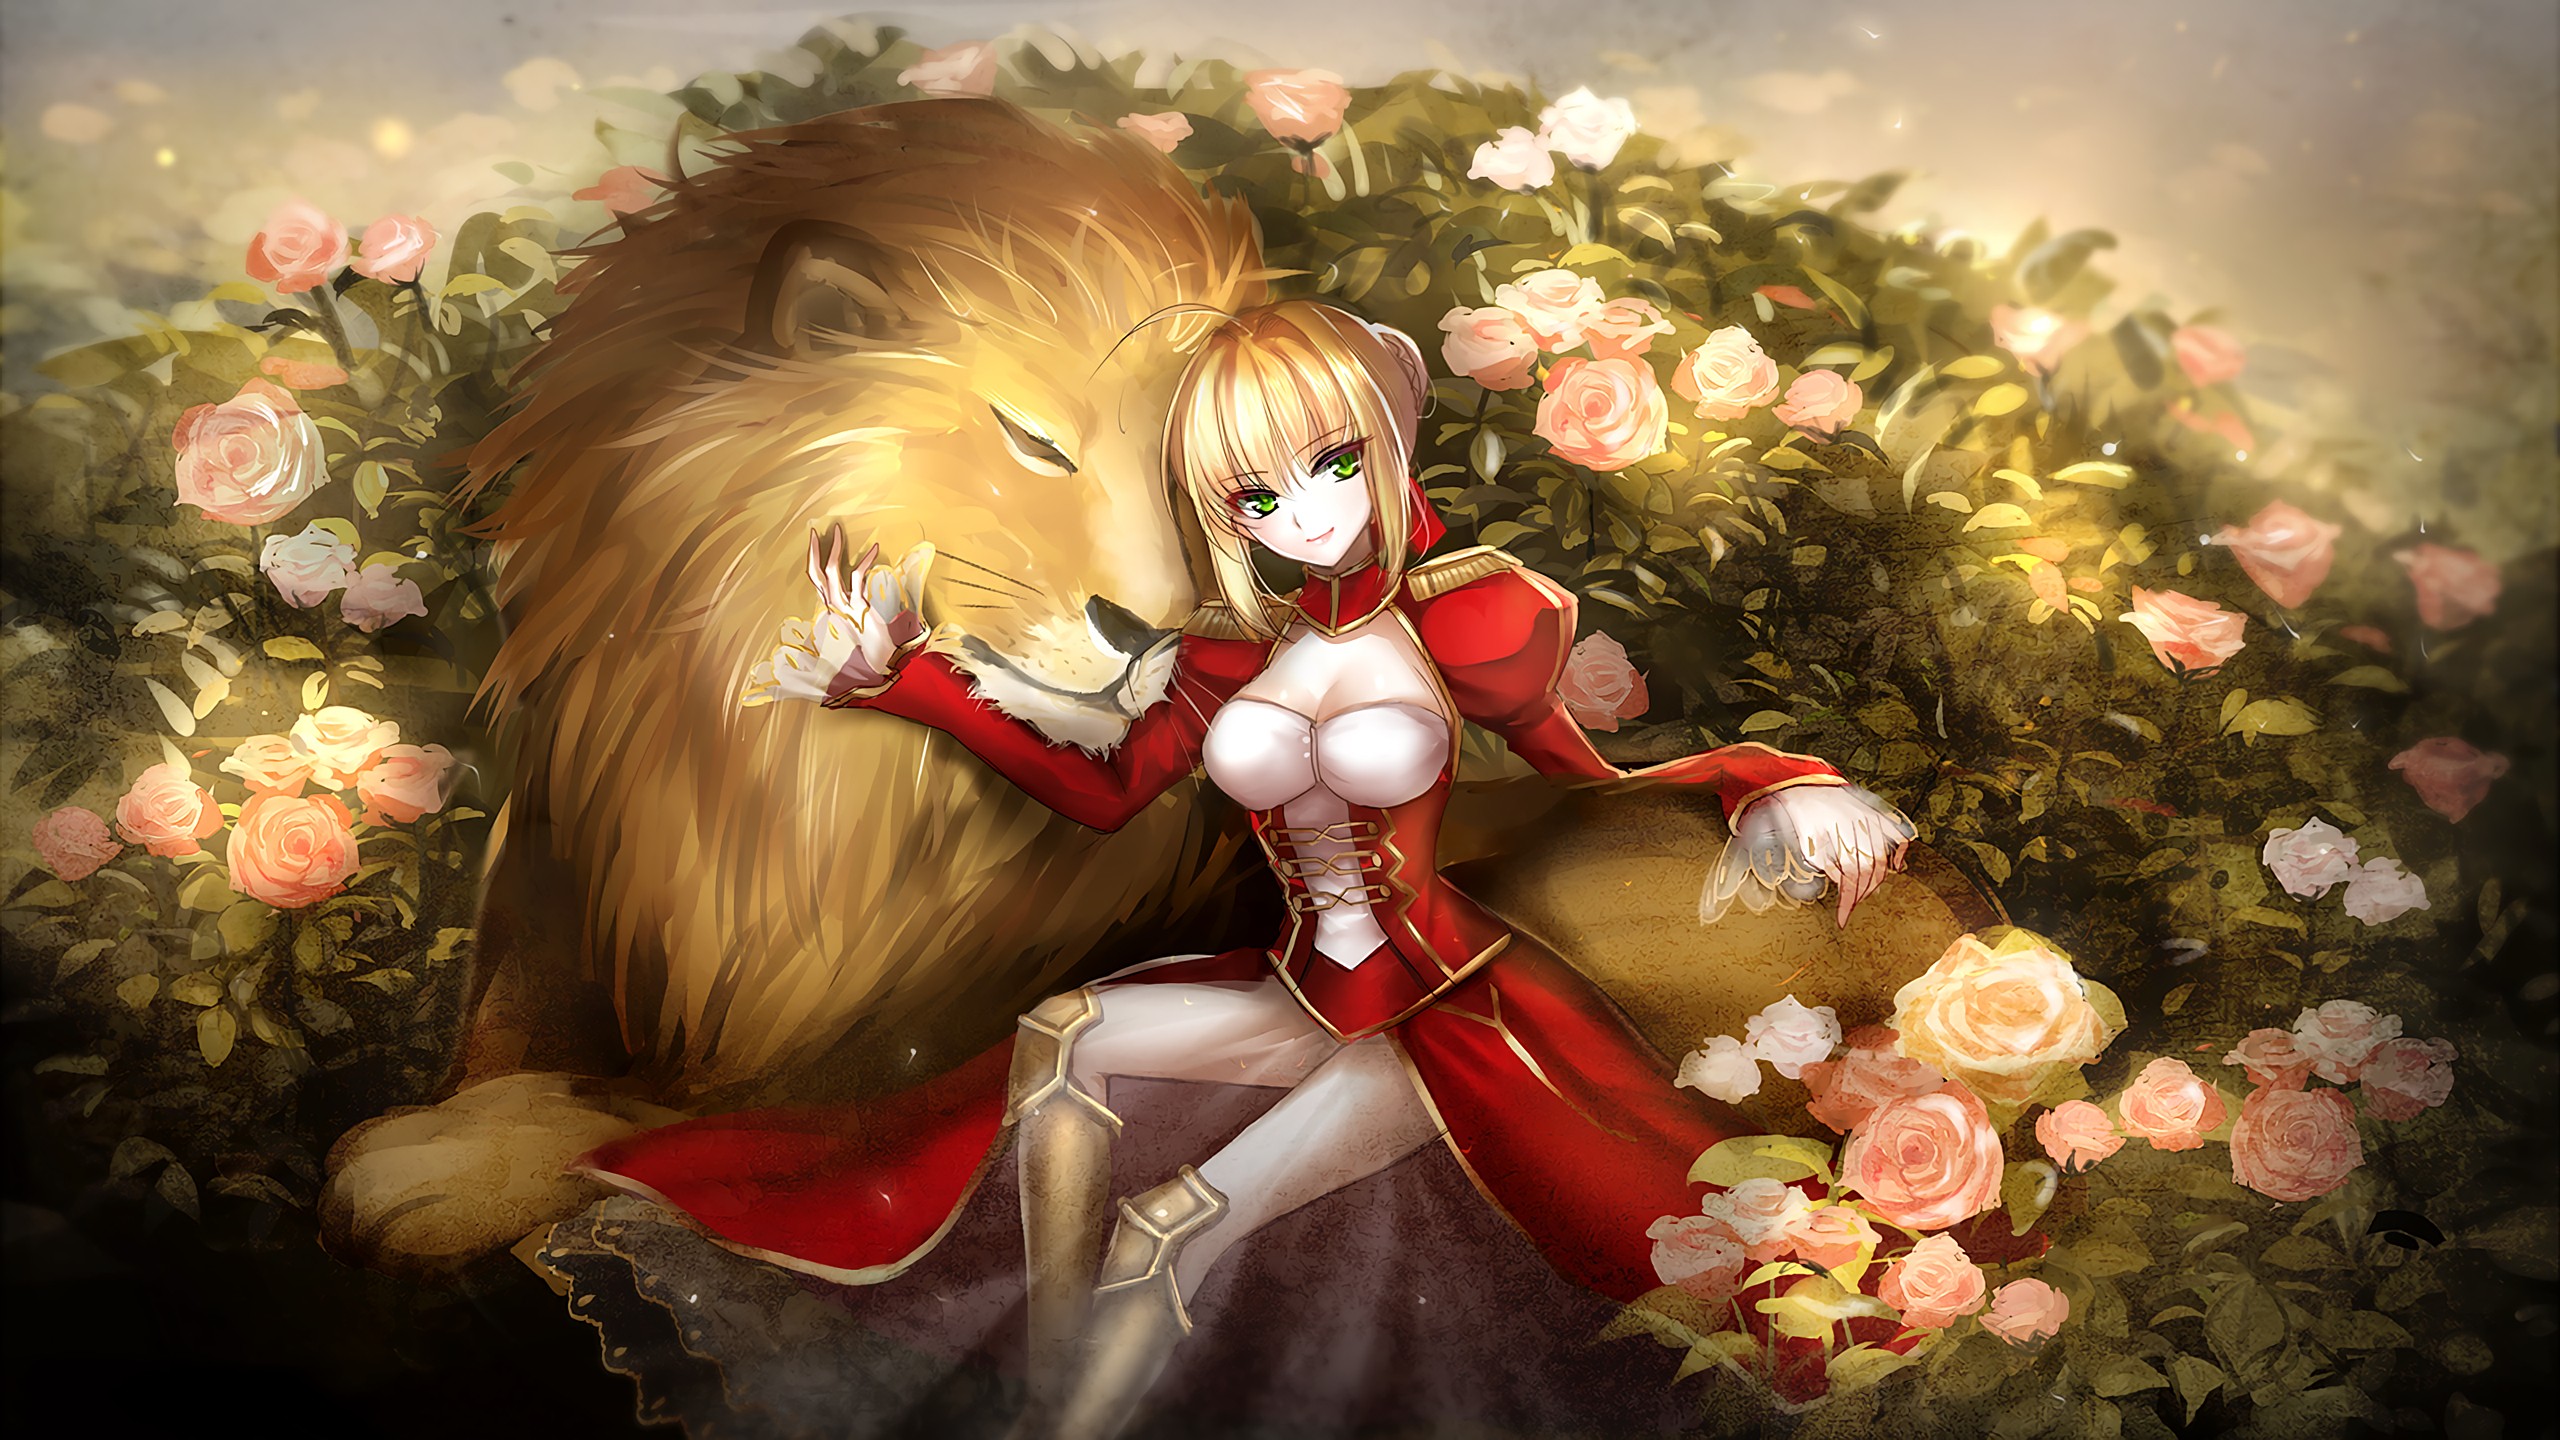 Anime Anime Girls Video Games Fate Grand Order Saber Saber Extra 2560x1440